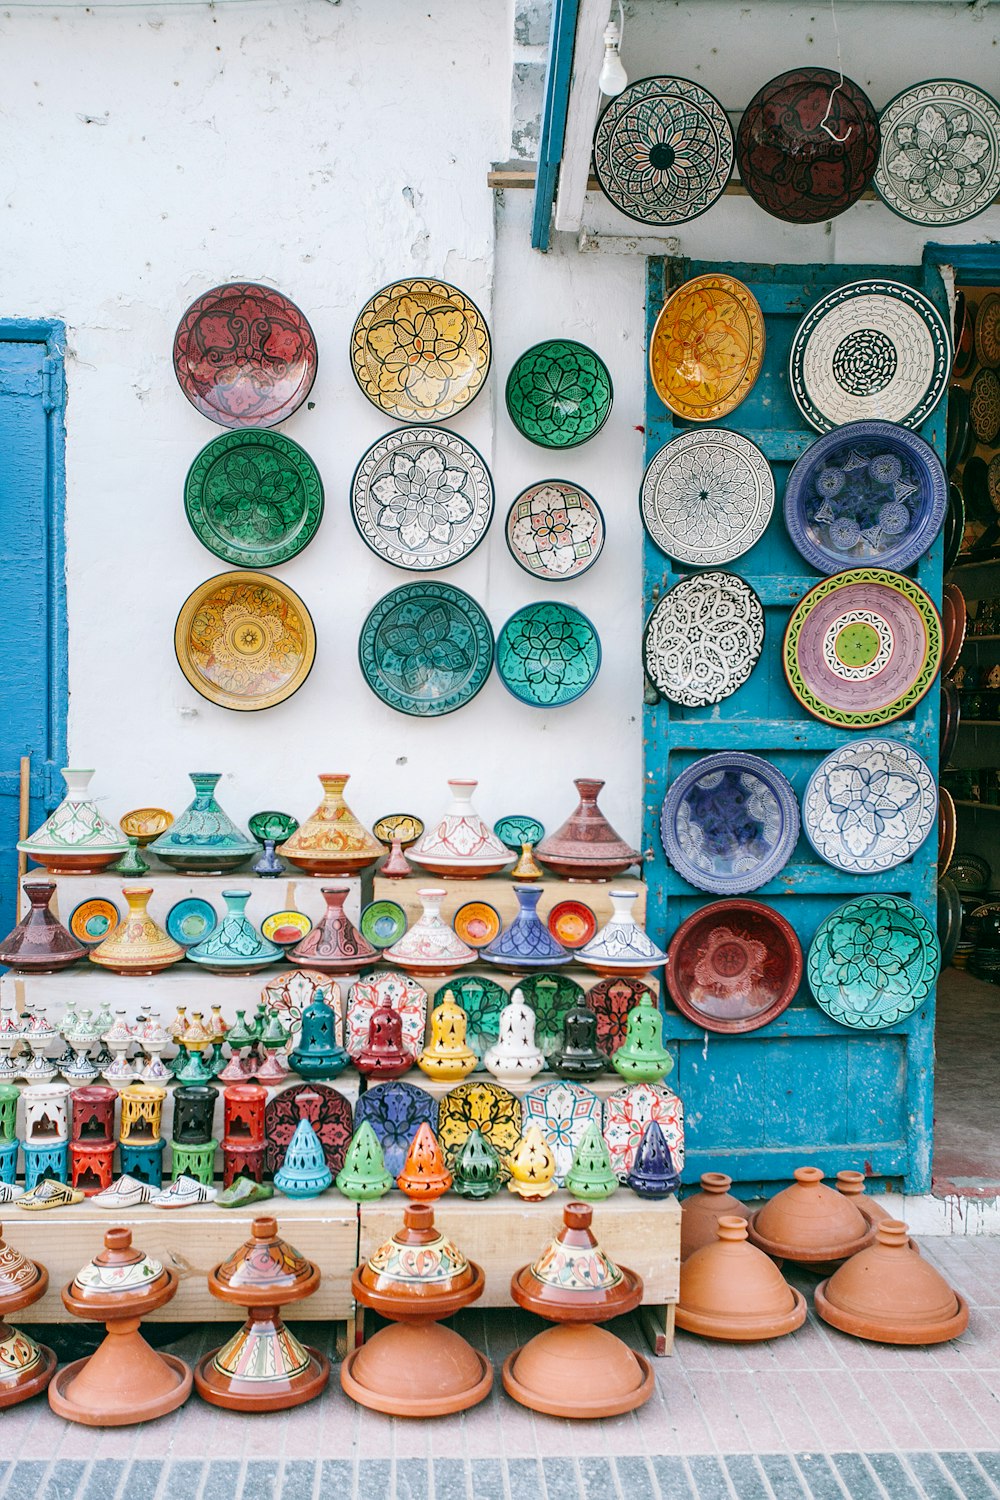 flower pots and decorative plates on wall